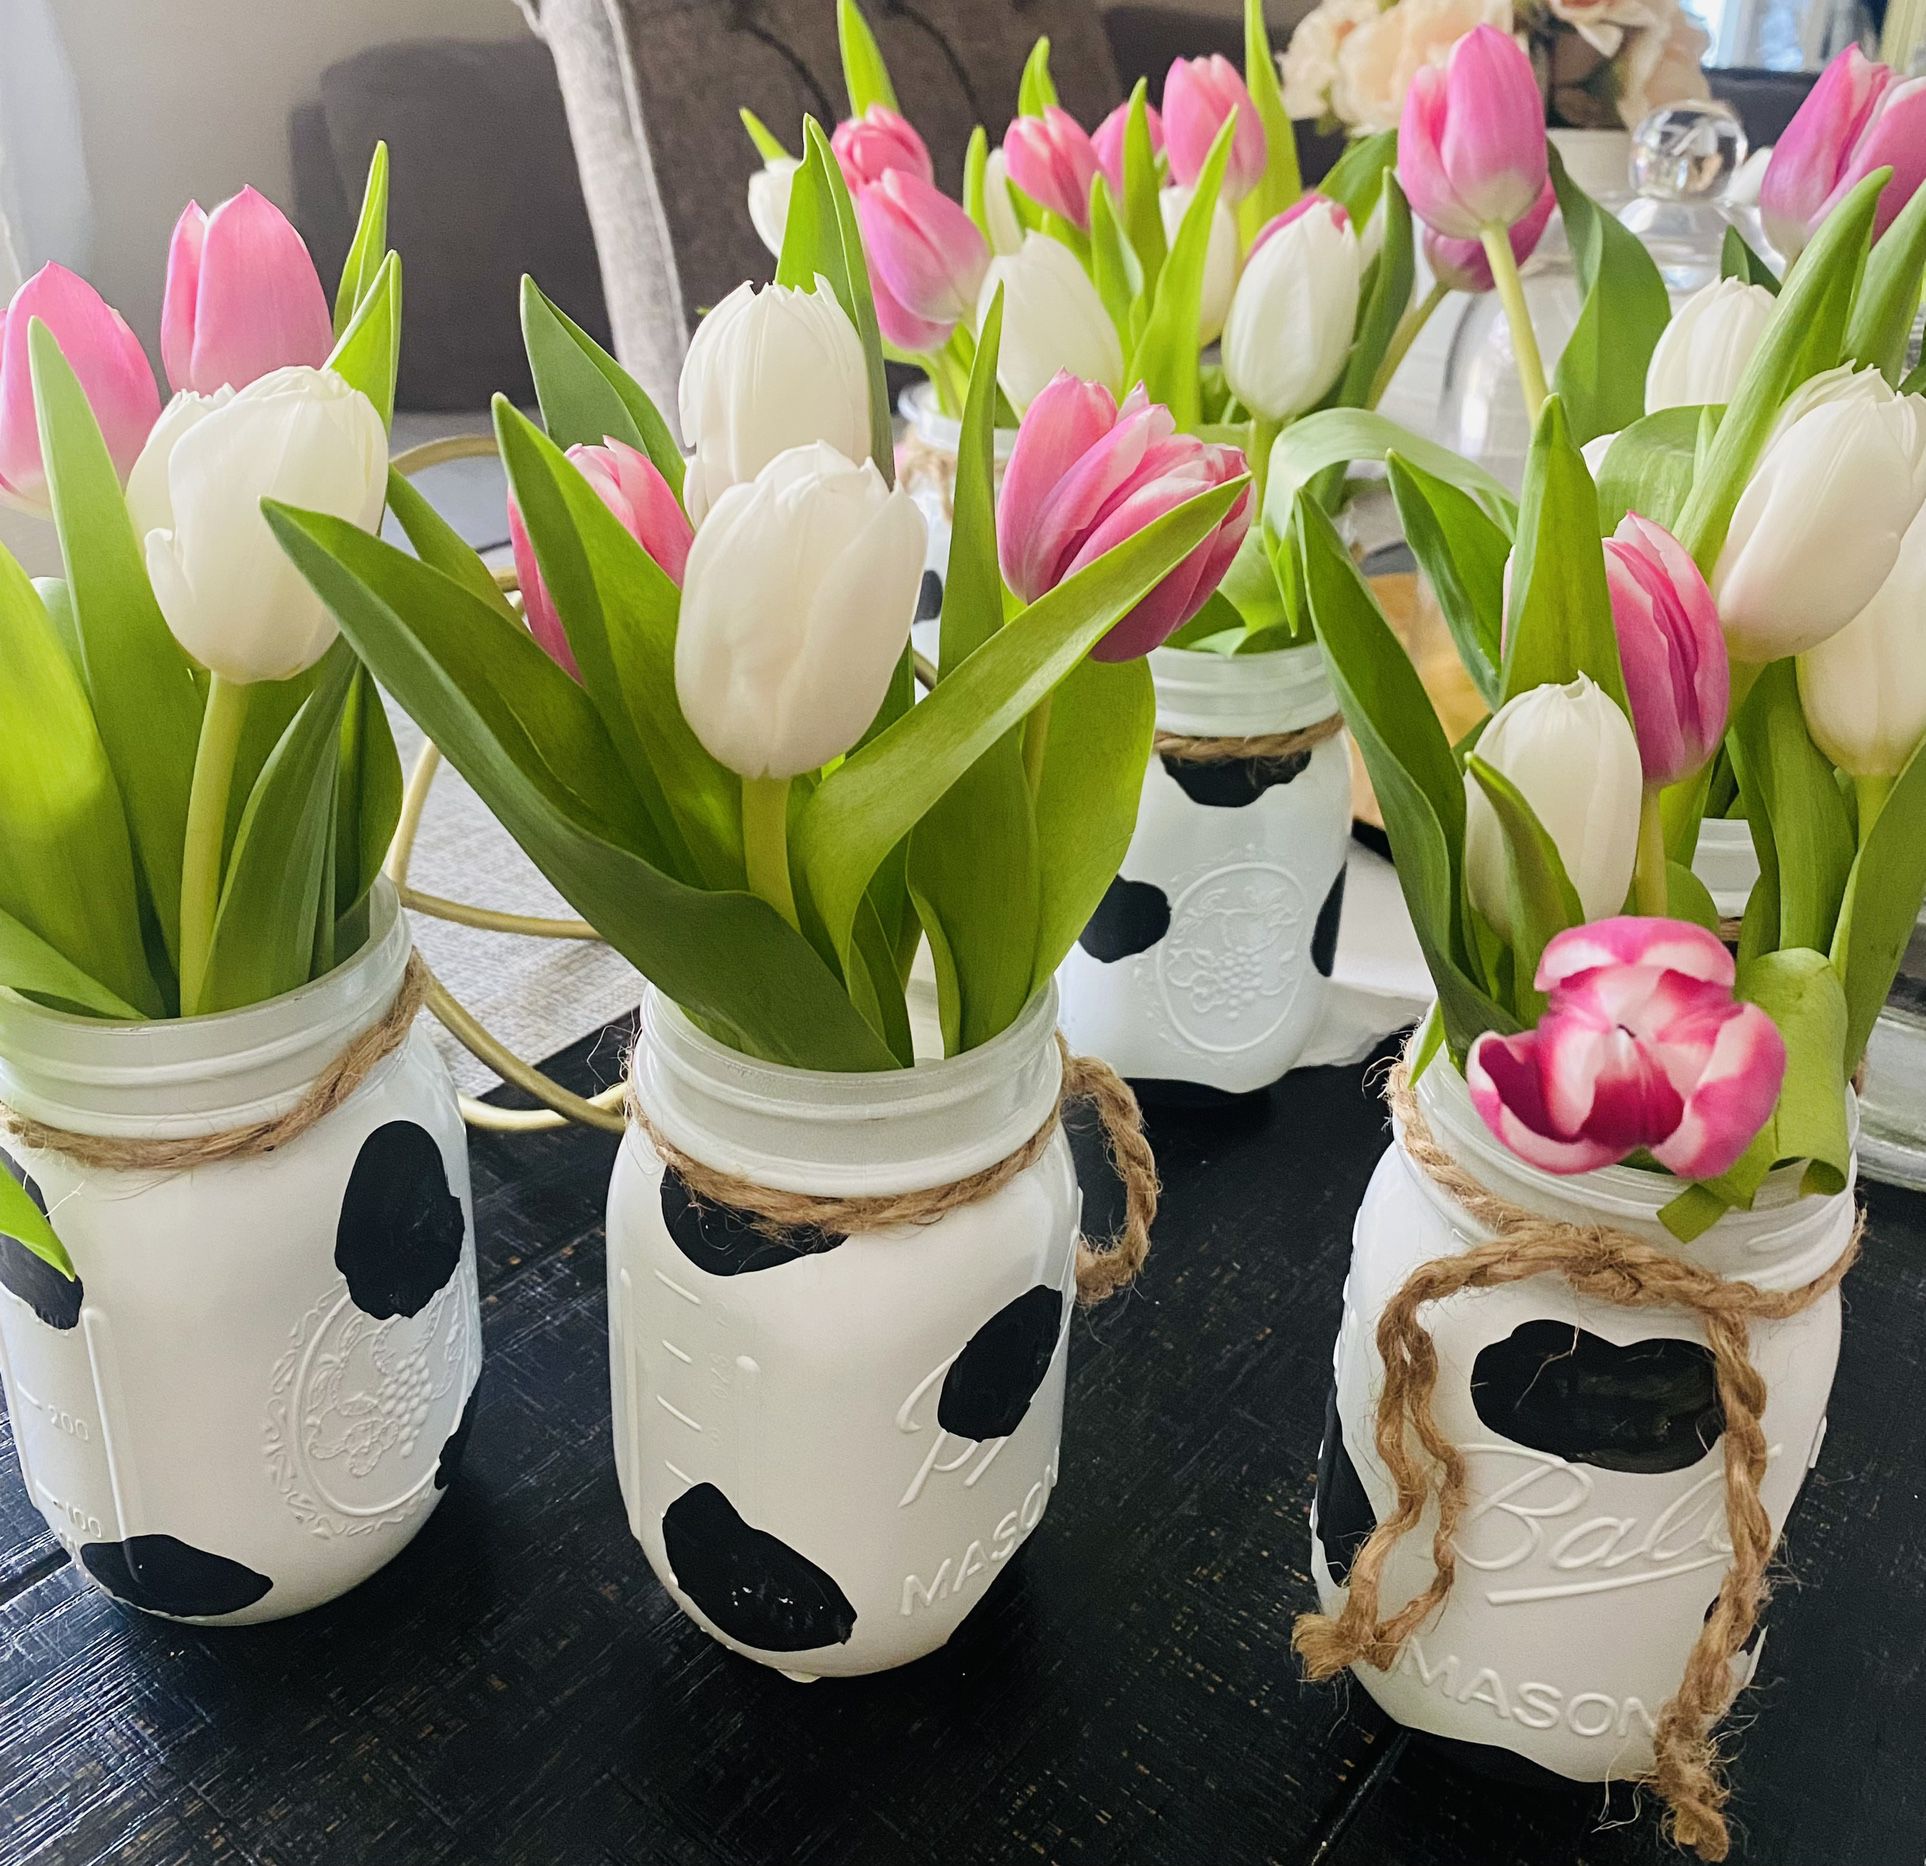 mason jars for centerpieces (tulips not included)